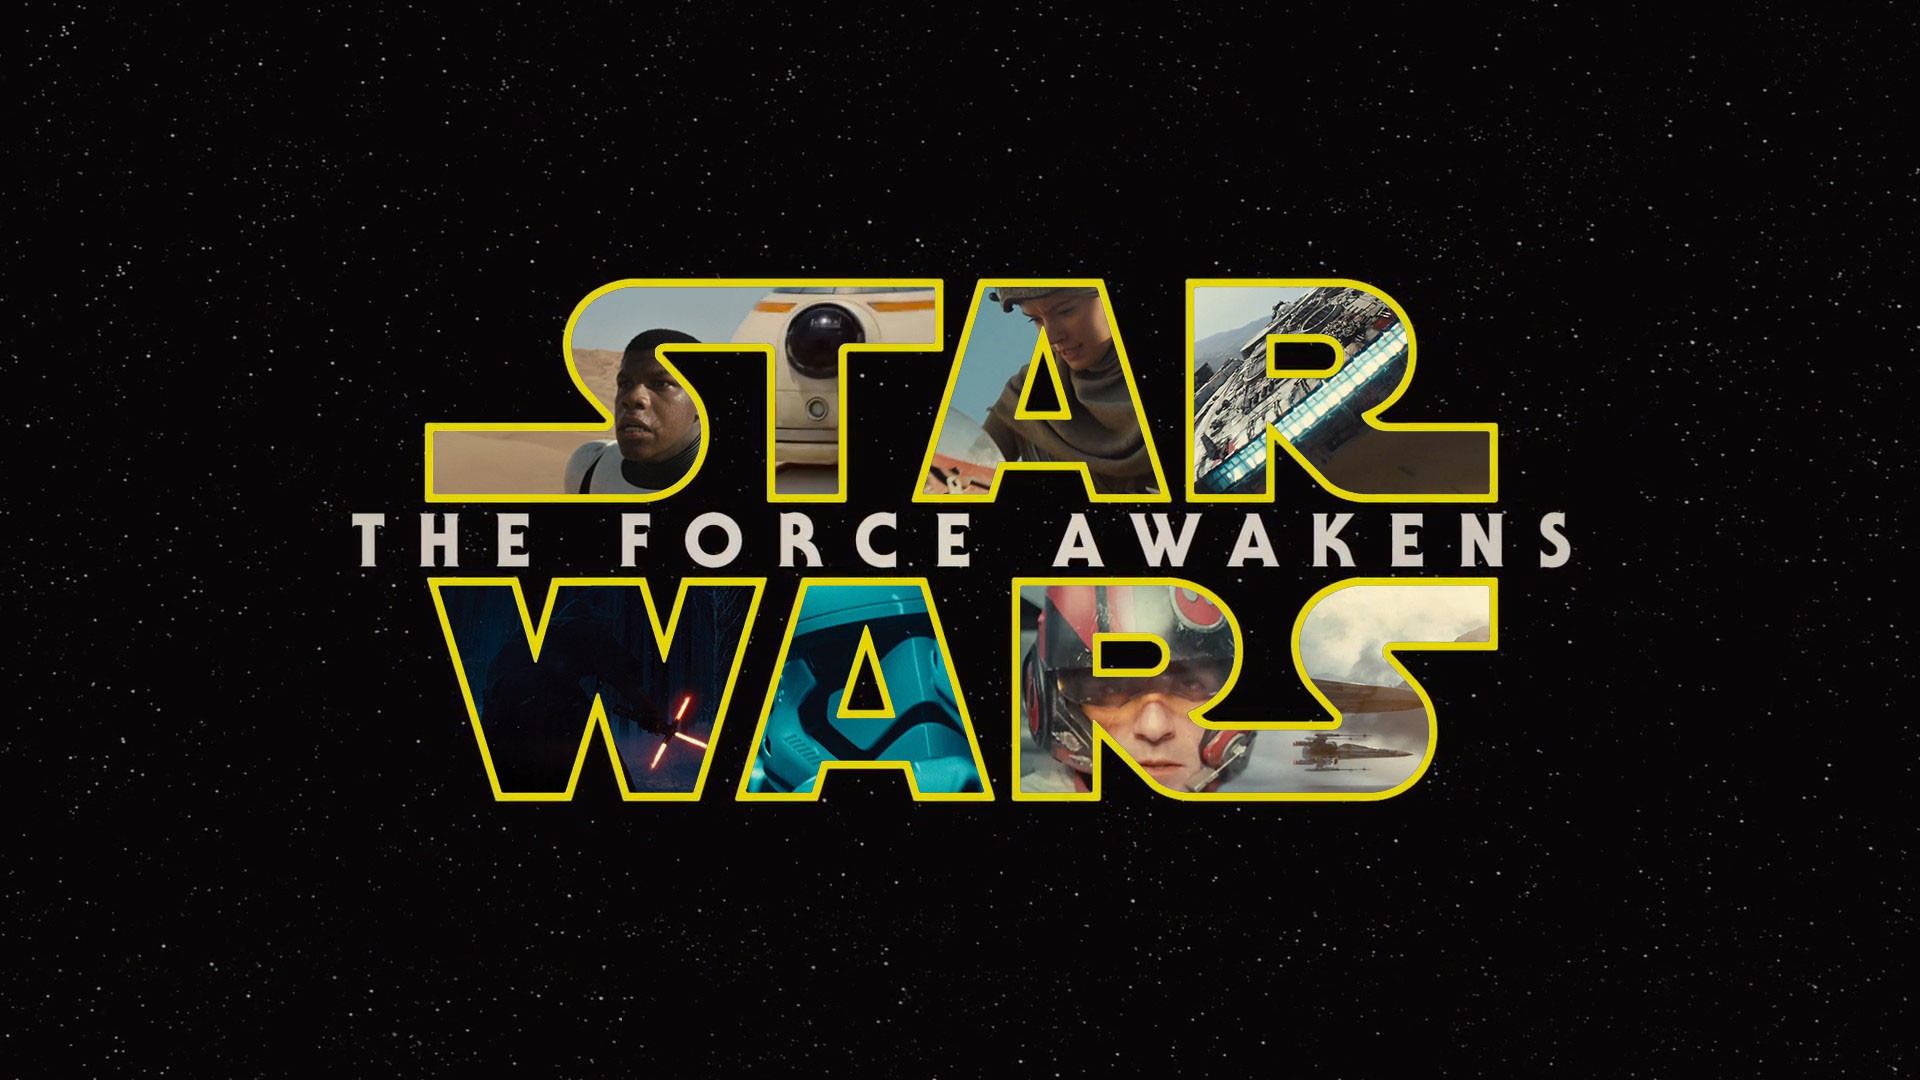 1920x1080 Get ready for the Force Awakens with these 26 Star Wars.